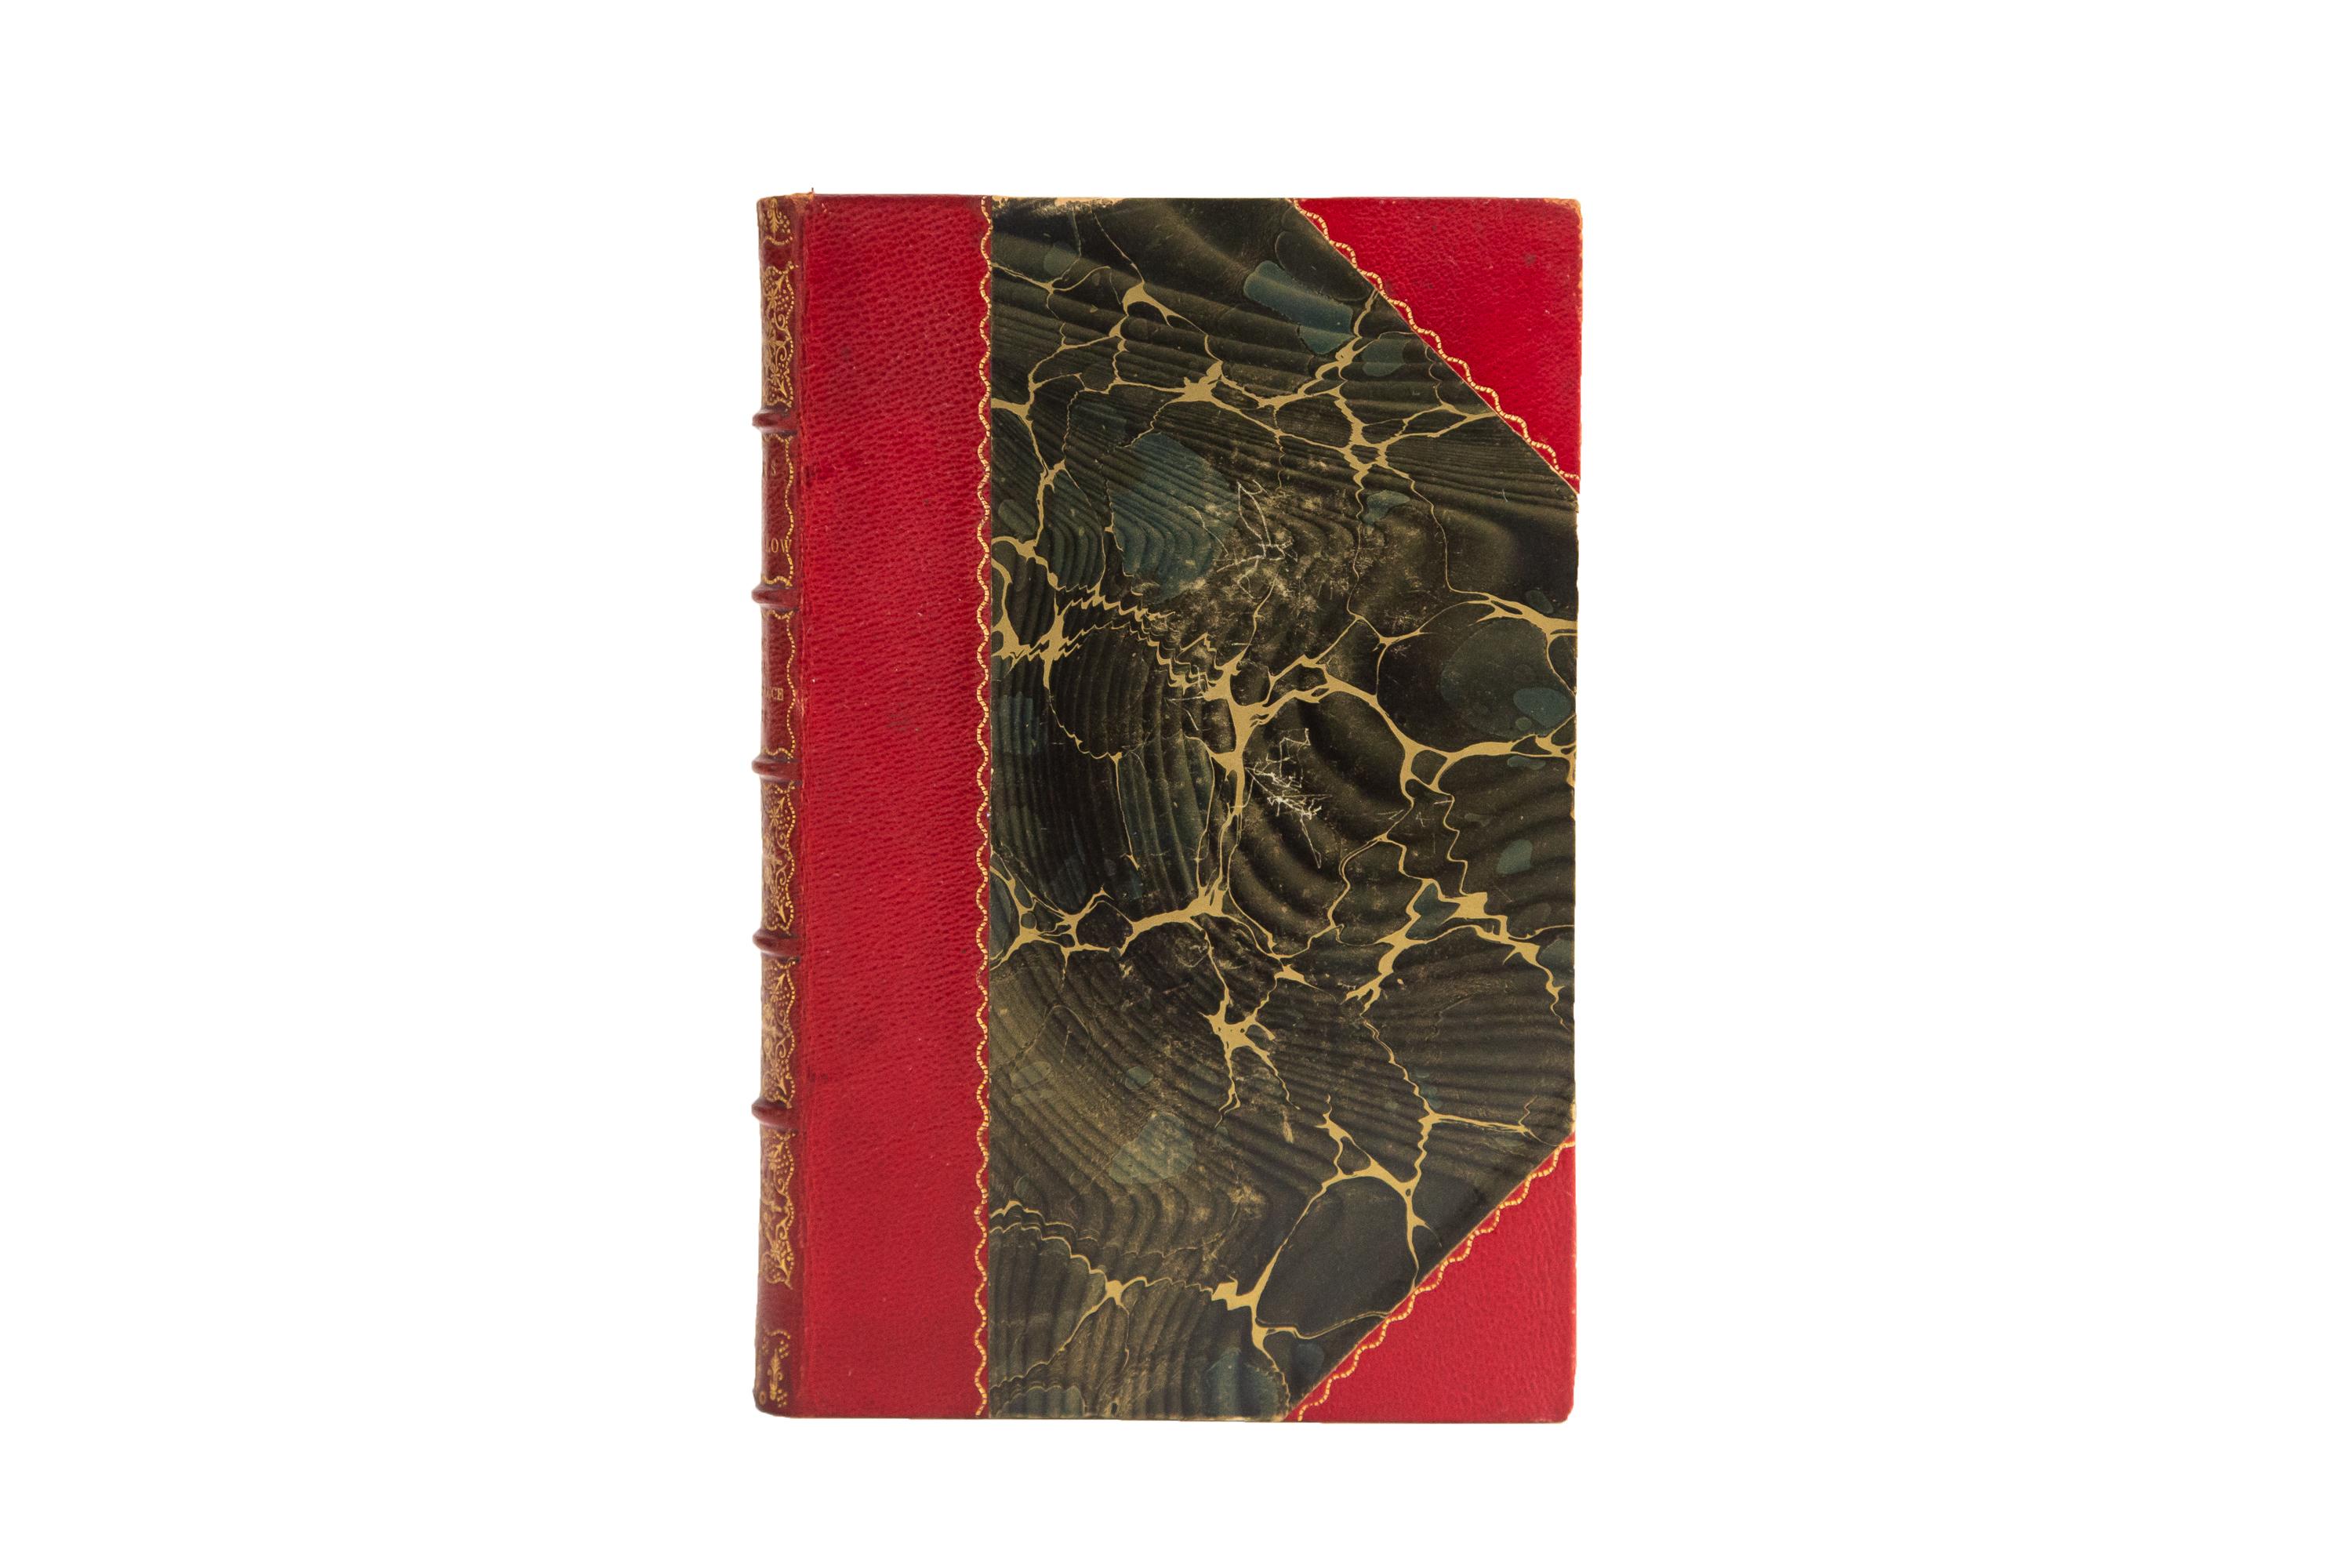 11 Volumes. Henry Wadsworth Longfellow, The Complete Poetical Works. Riverside Edition. Bound in 3/4 red morocco and marbled boards, bordered in gilt-tooling. Raised bands with panels displaying ornate floral gilt-tooling and gilt-label lettering.